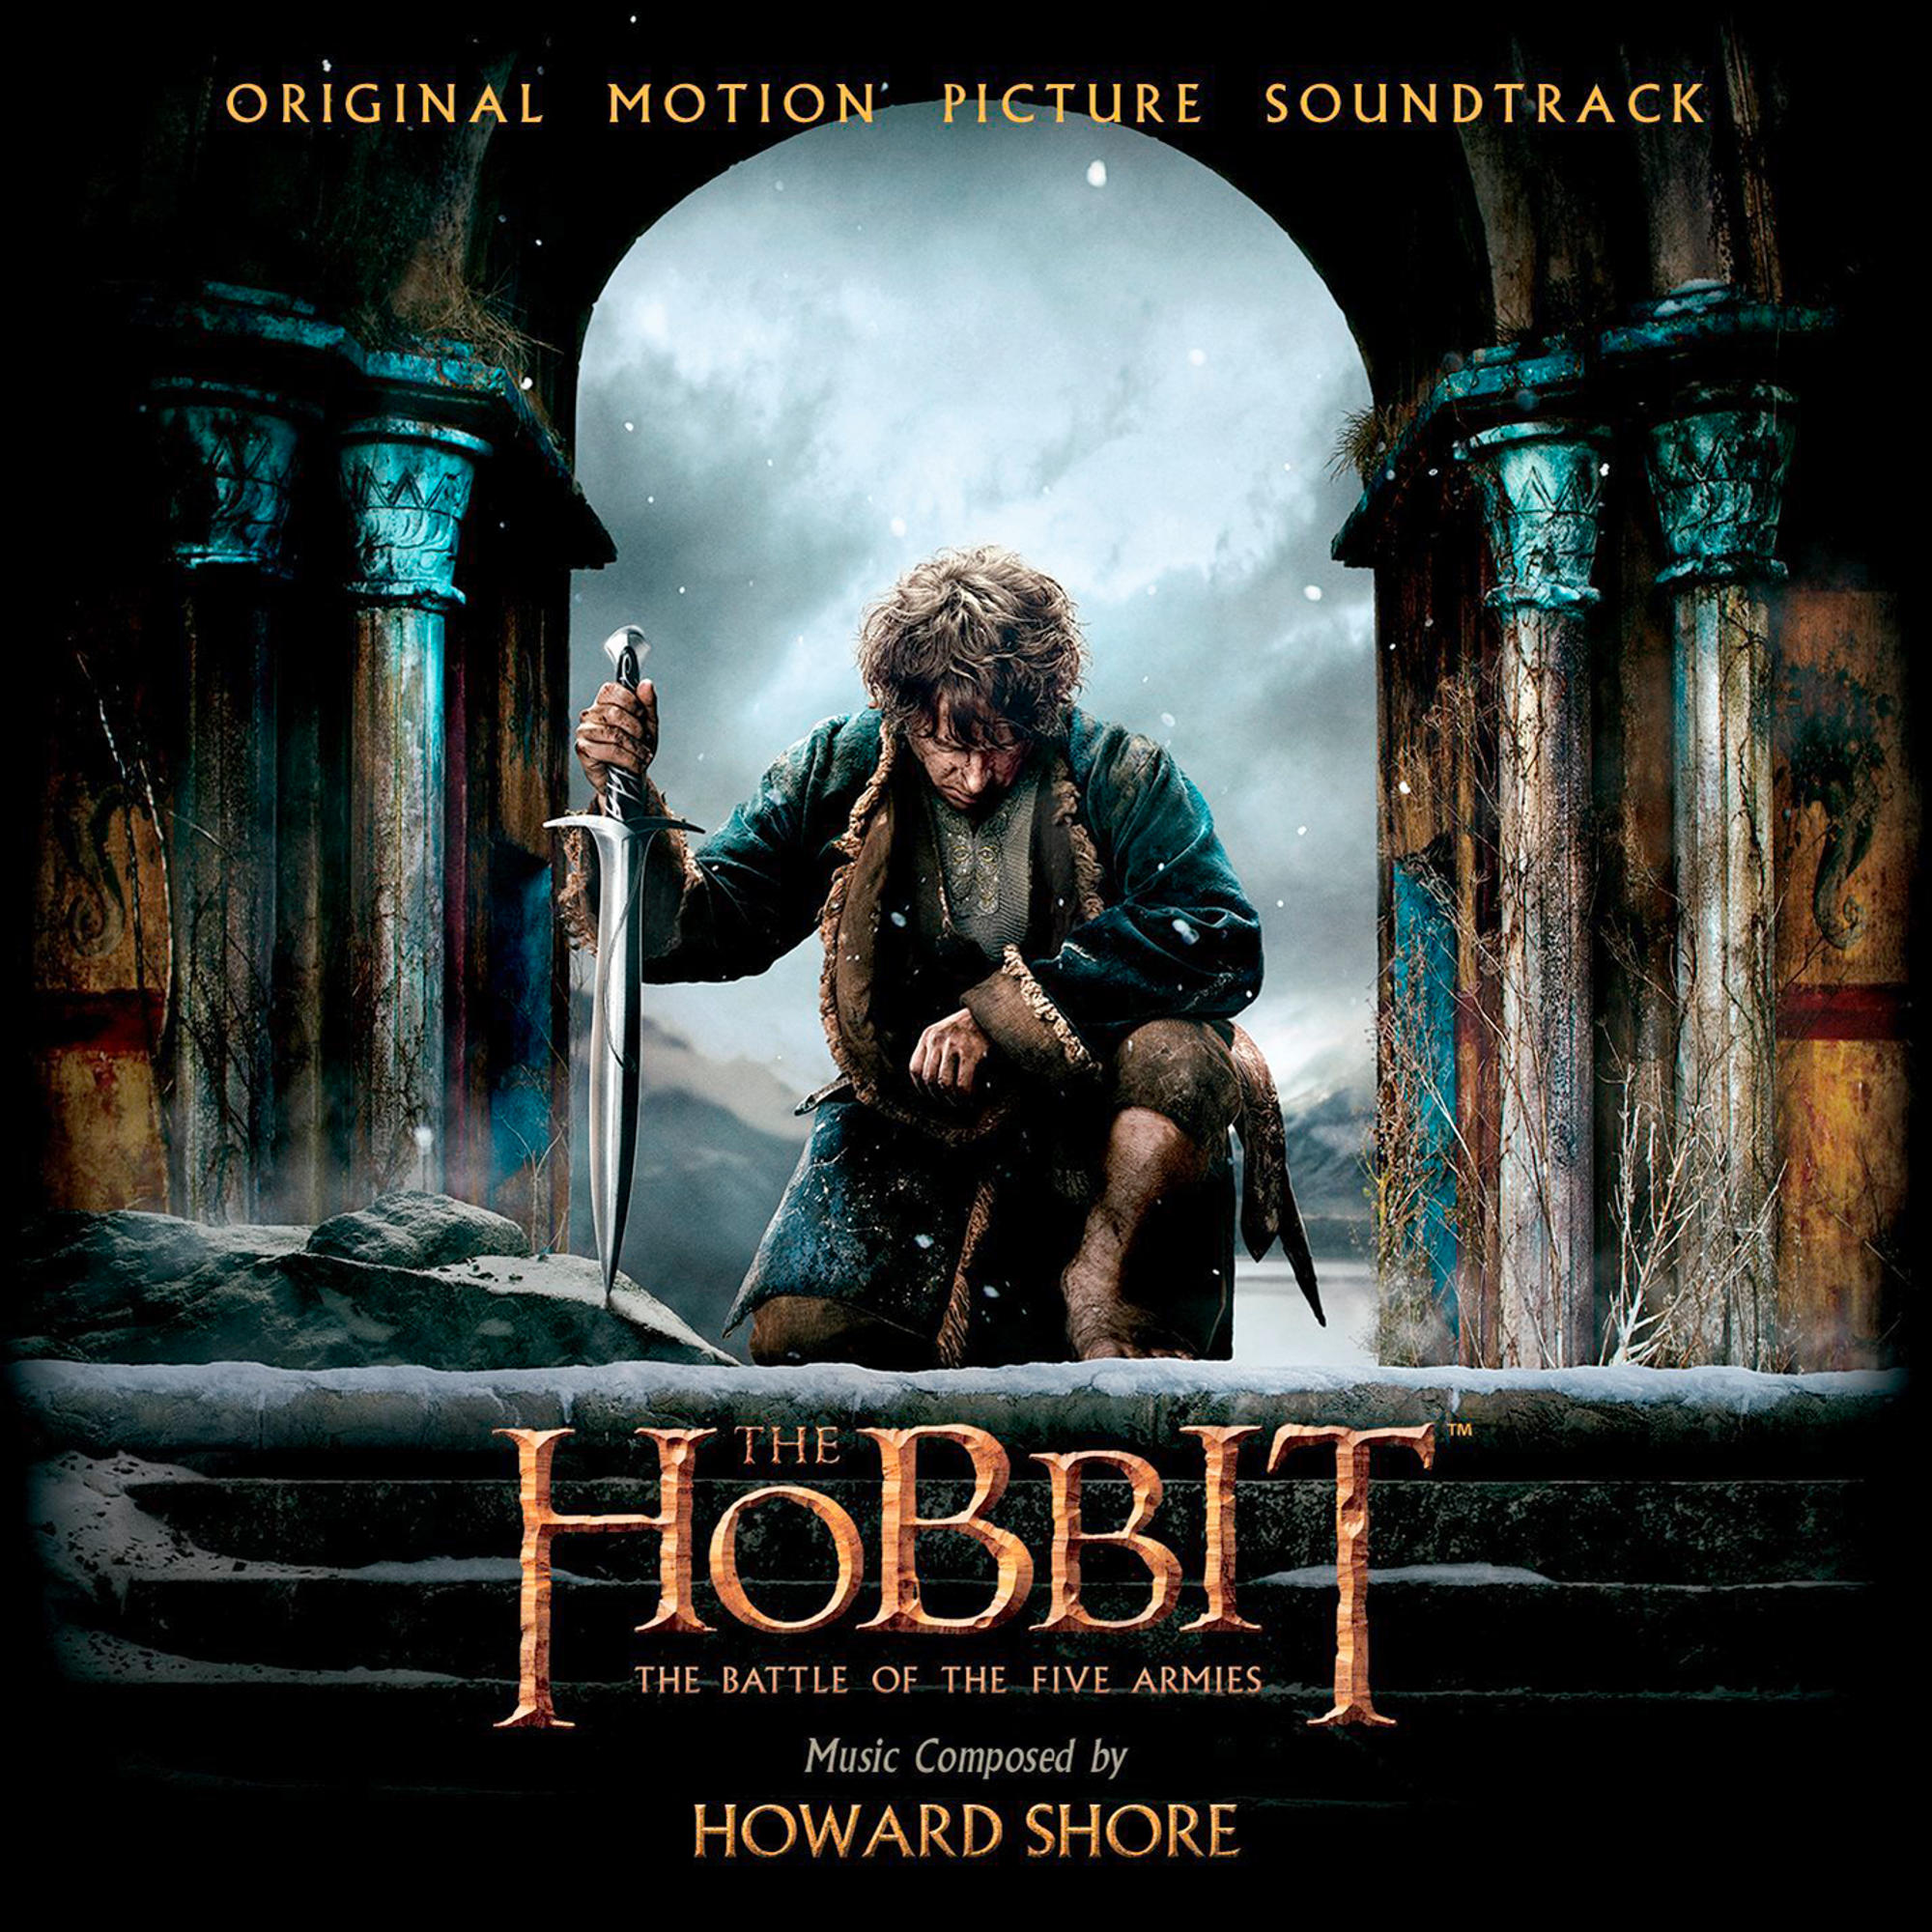 The Hobbit: - The The Shore Howard Of - Battle Armies Five (CD)